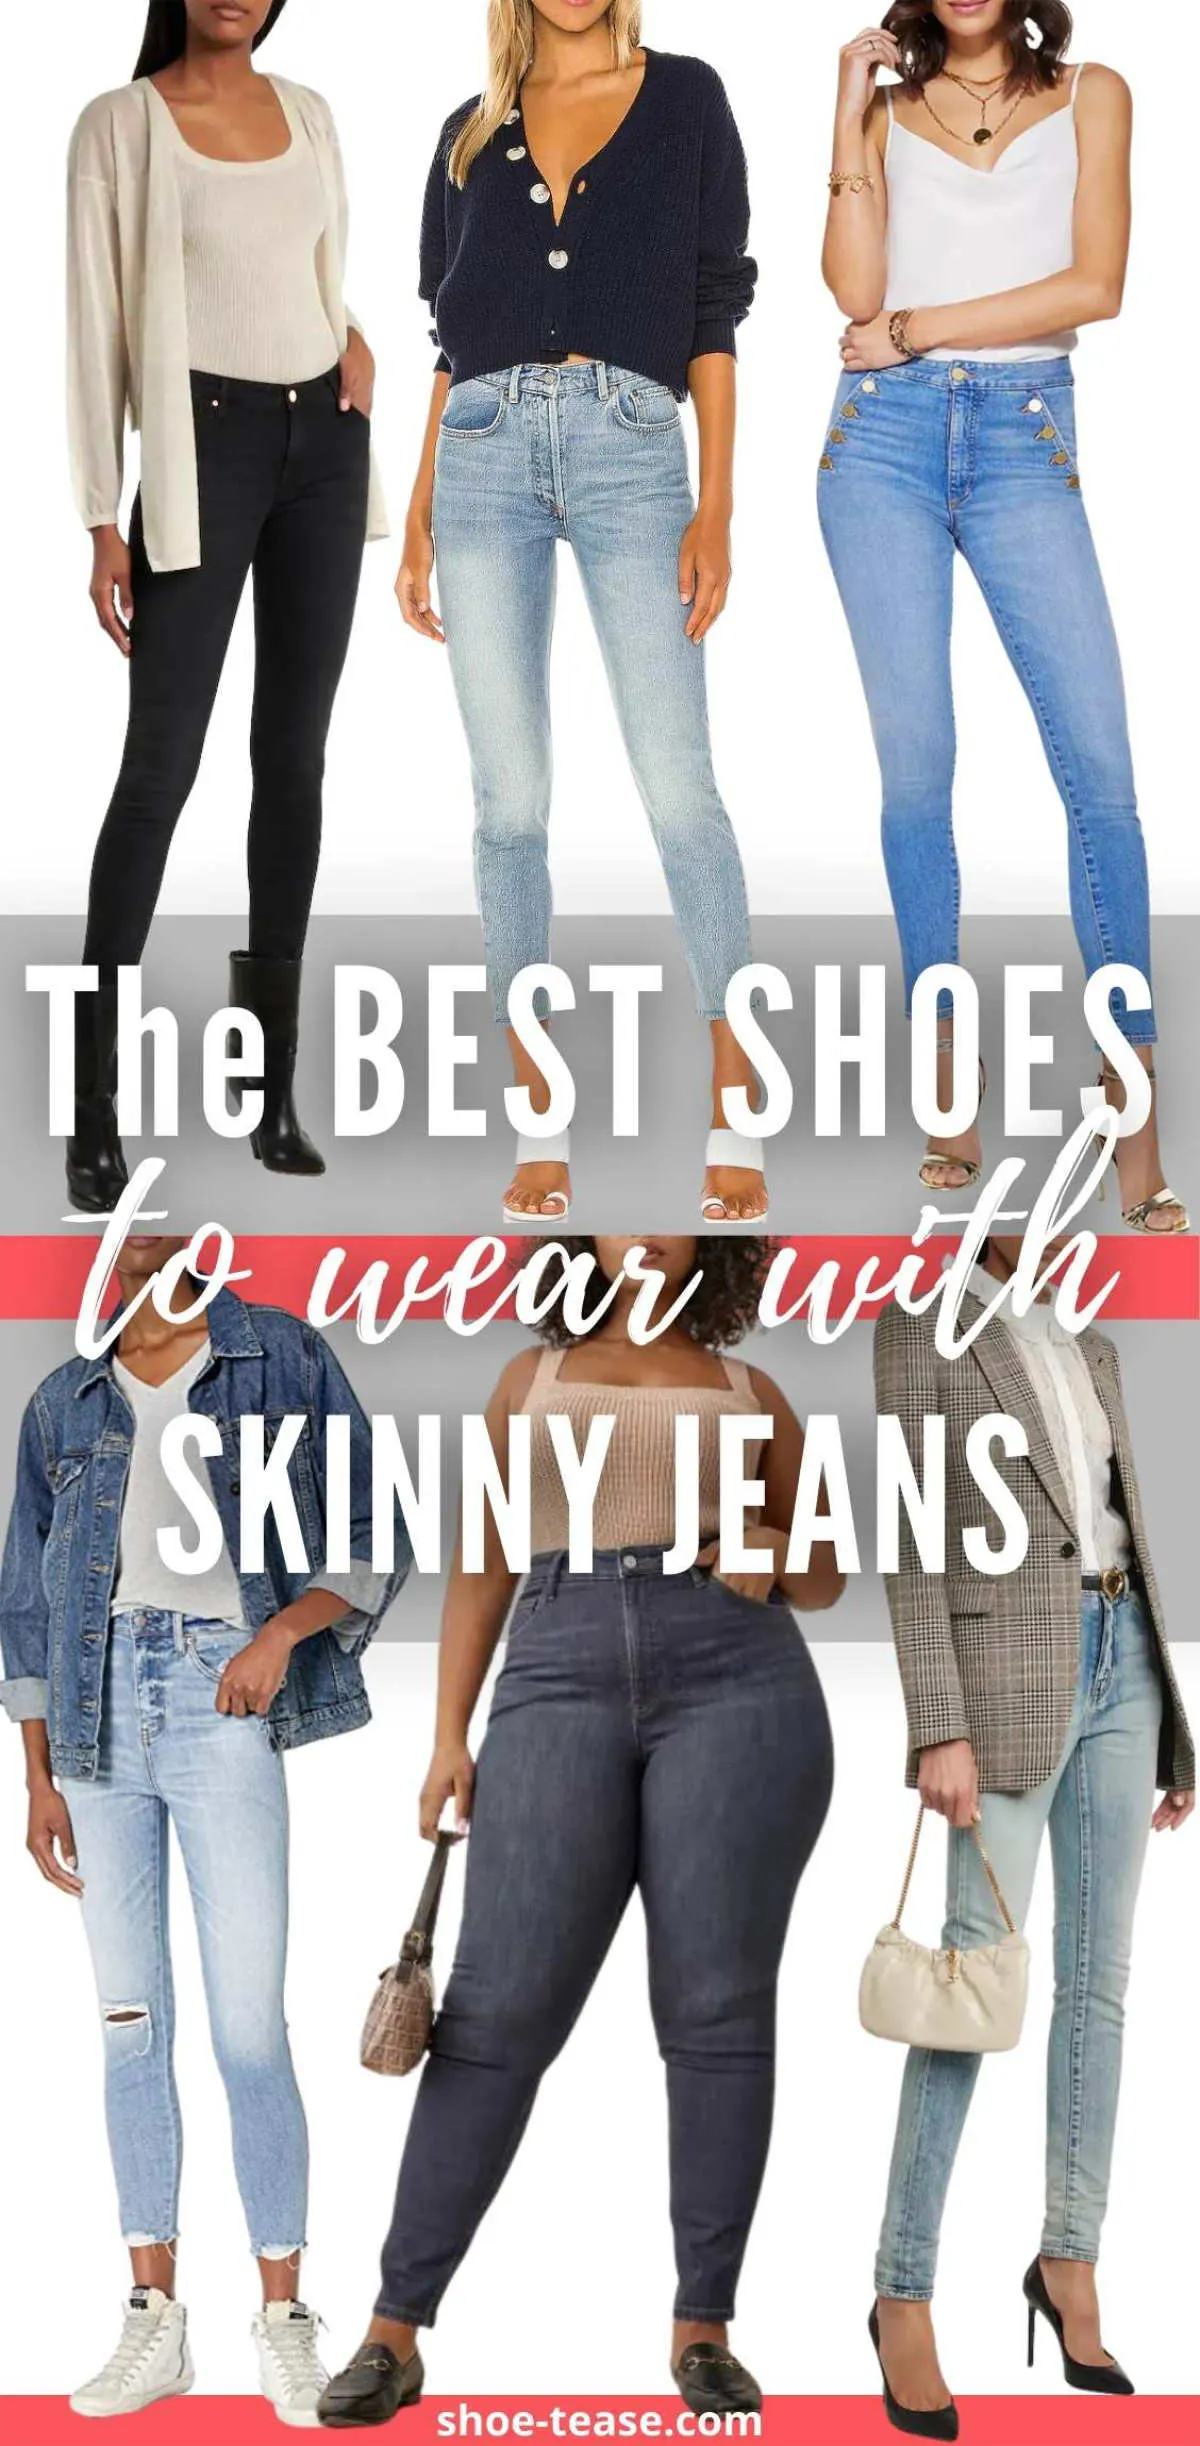 White copy reading the best shoes to wear with skinny jeans over collage of 6 women wearing different skinny jeans outfits.